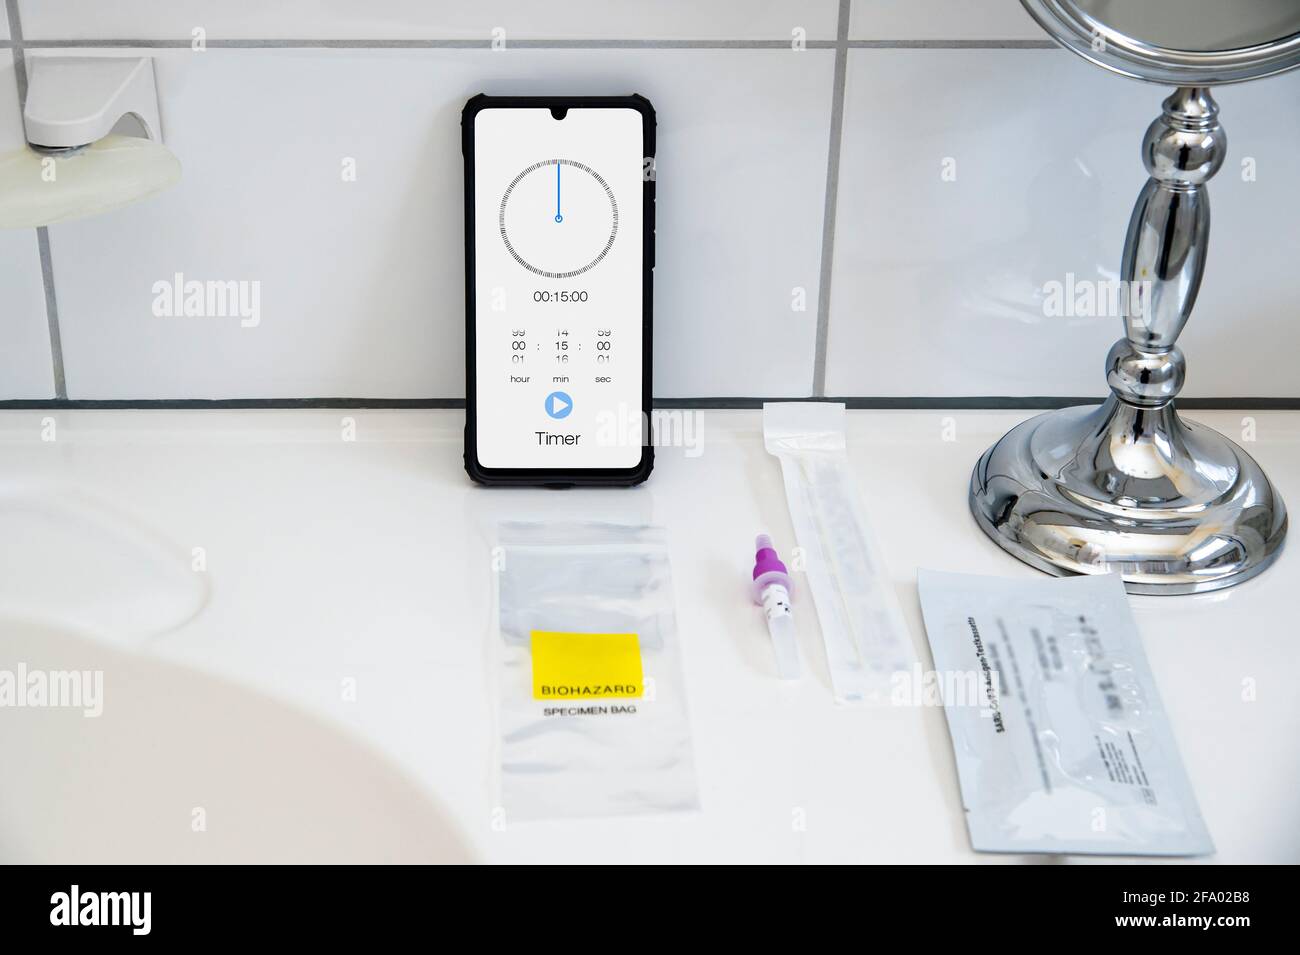 SARS CoV-2 antigen test utensils. The self test is in a bathroom on a sink. A smartphone shows how long the test has to work. German text: SARS CoV2 a Stock Photo